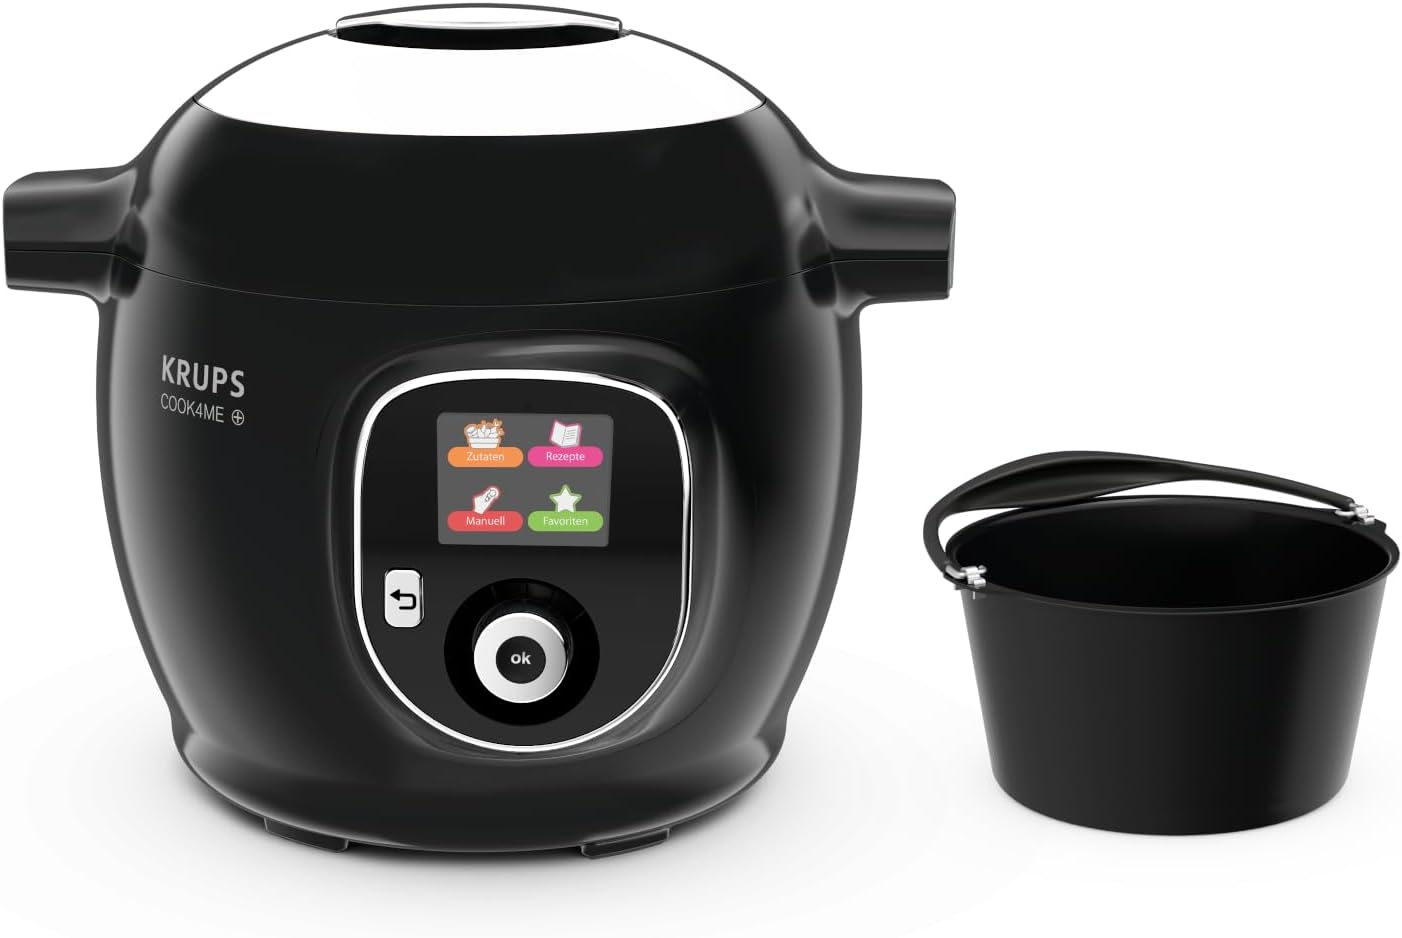 Krups CZ7128 Cooker Cook4Me+ Gourmet | Pressure Cooker | Steamer | Rice Cooker | 1600 W | Capacity 6 L | Electric Pressure Cooker | Steam Cooking | Searing | Includes Baking Mould